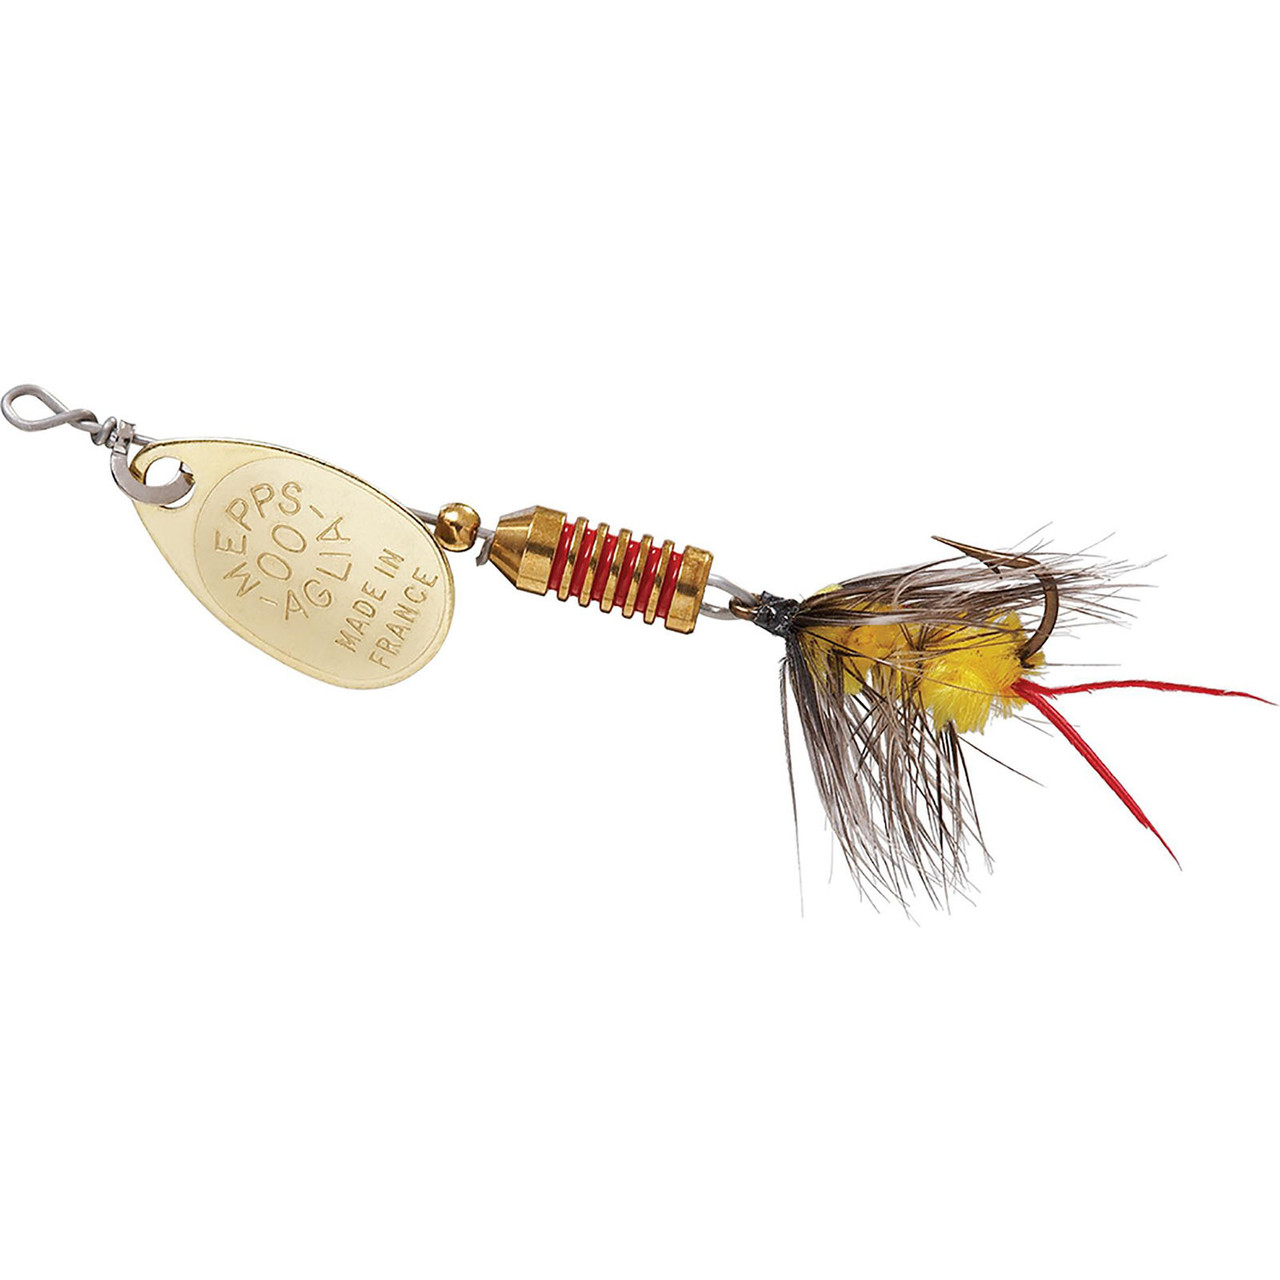 Mepps Aglia Wooly Worm Spin Fly - FishUSA